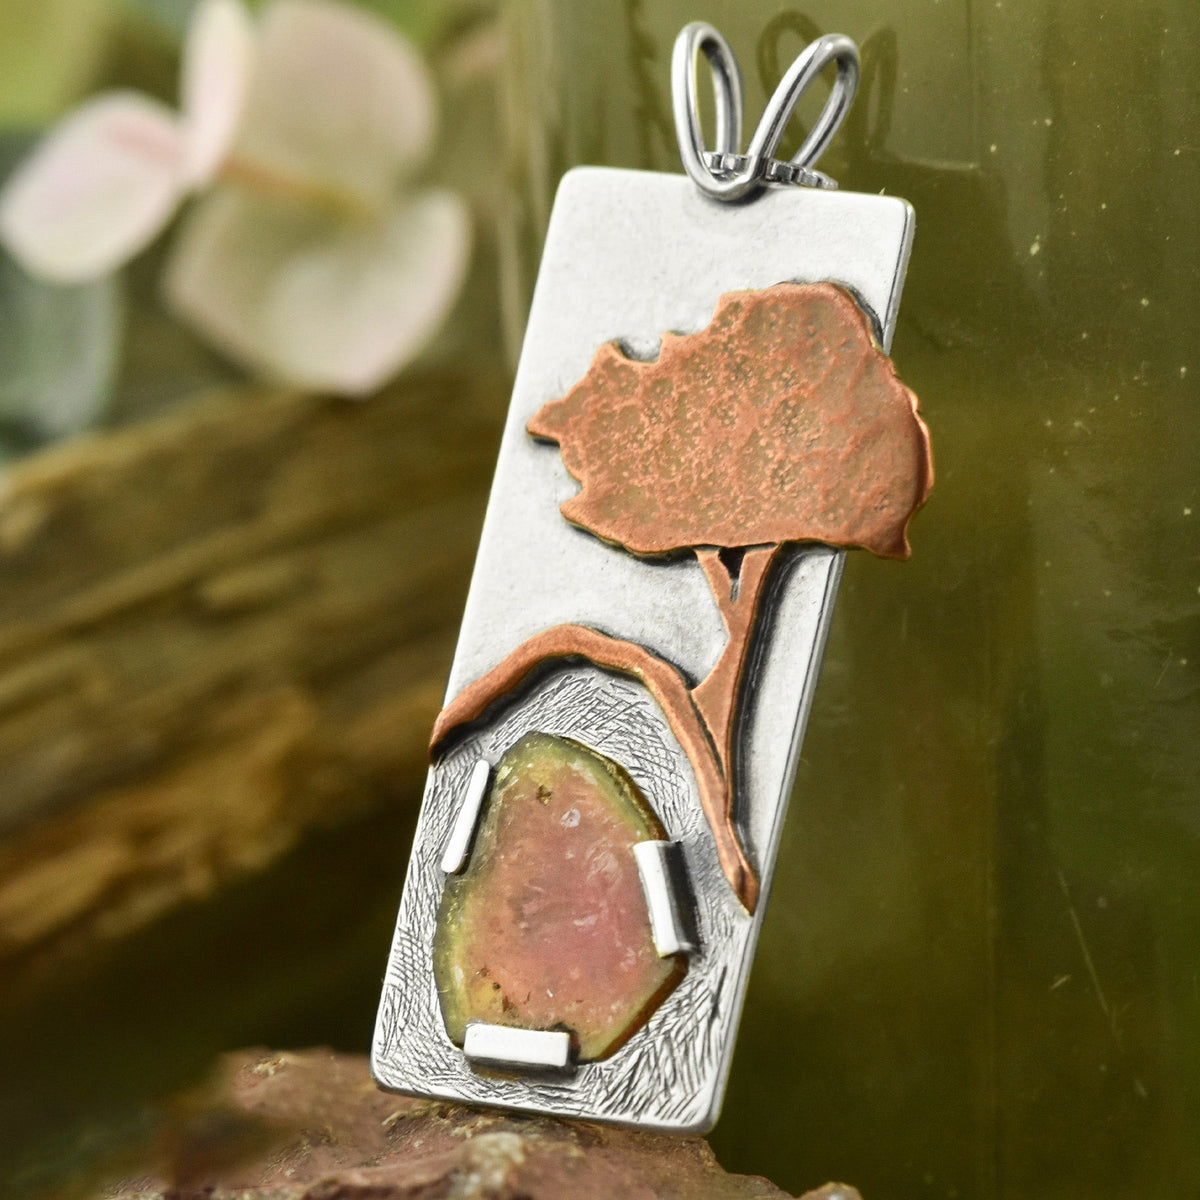 Watermelon Tourmaline Tree Pendant - Choose Your Own Stone - Mixed Metal Pendant A - 14 x 11mm - Small Imperfections on Stone Face B - 10 x 10mm 7135 - handmade by Beth Millner Jewelry